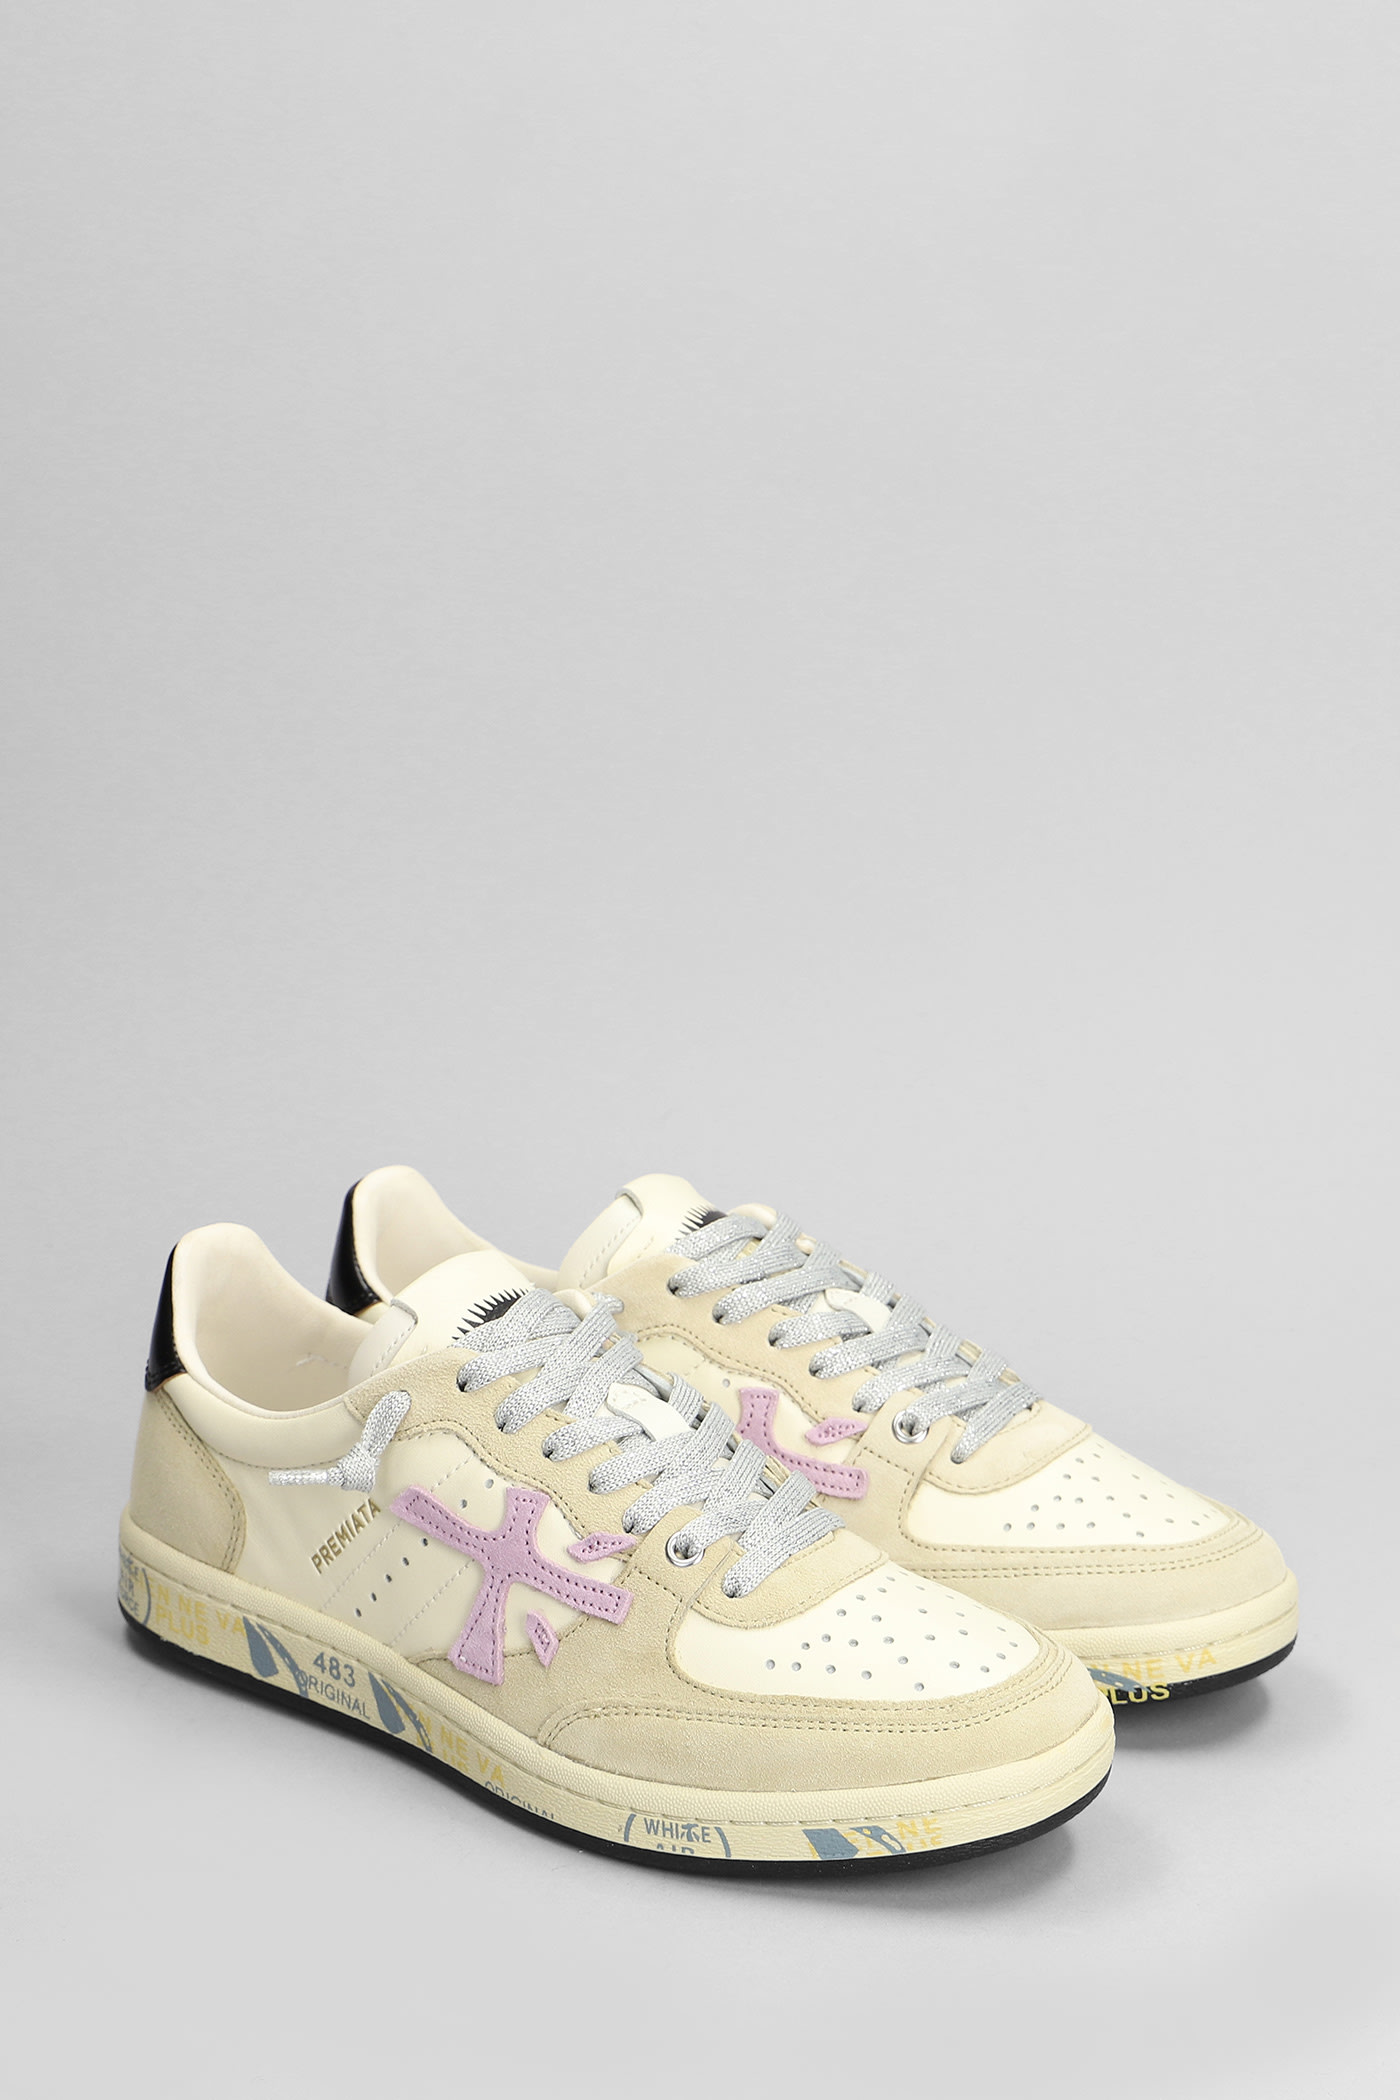 Shop Premiata Bskt Clay Sneakers In Beige Suede And Leather